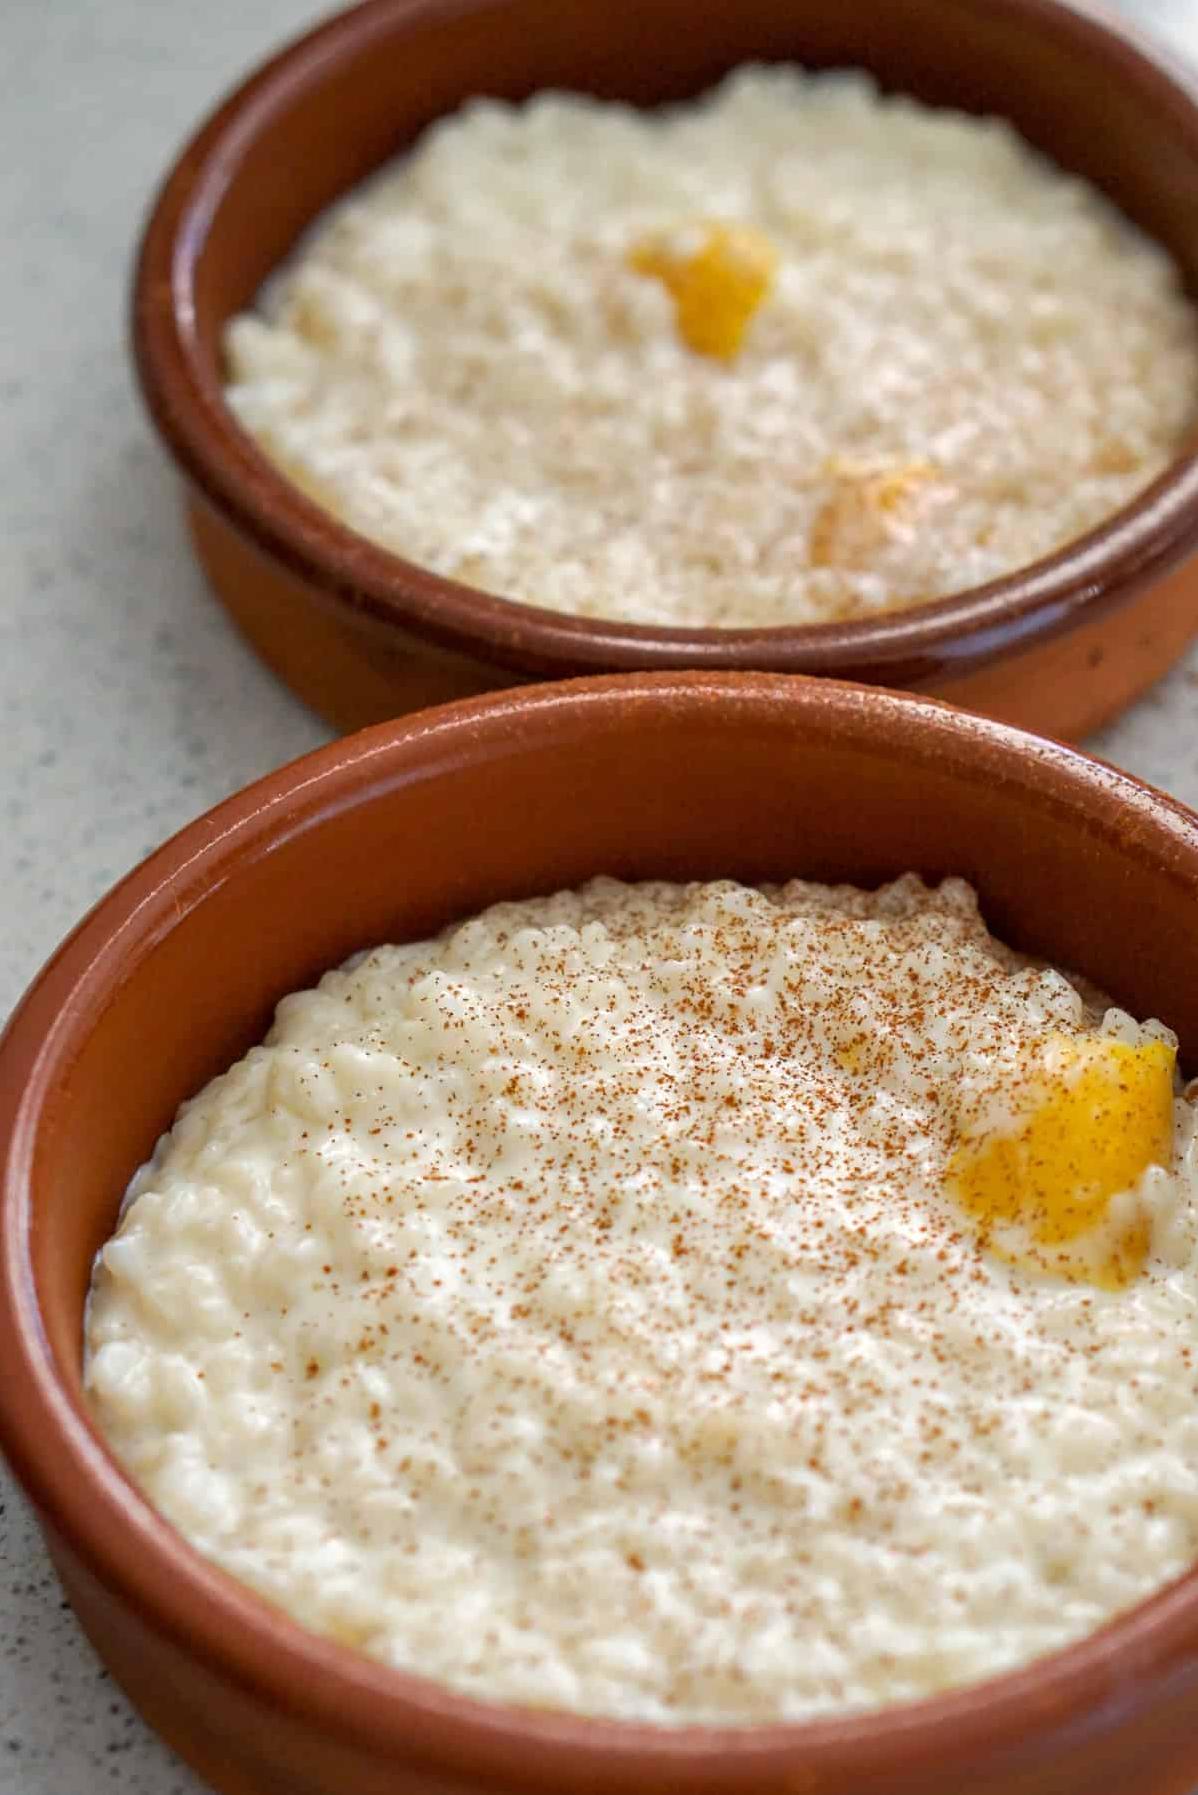  A delicious bowl of Arroz Con Leche with a sprinkle of cinnamon on top.